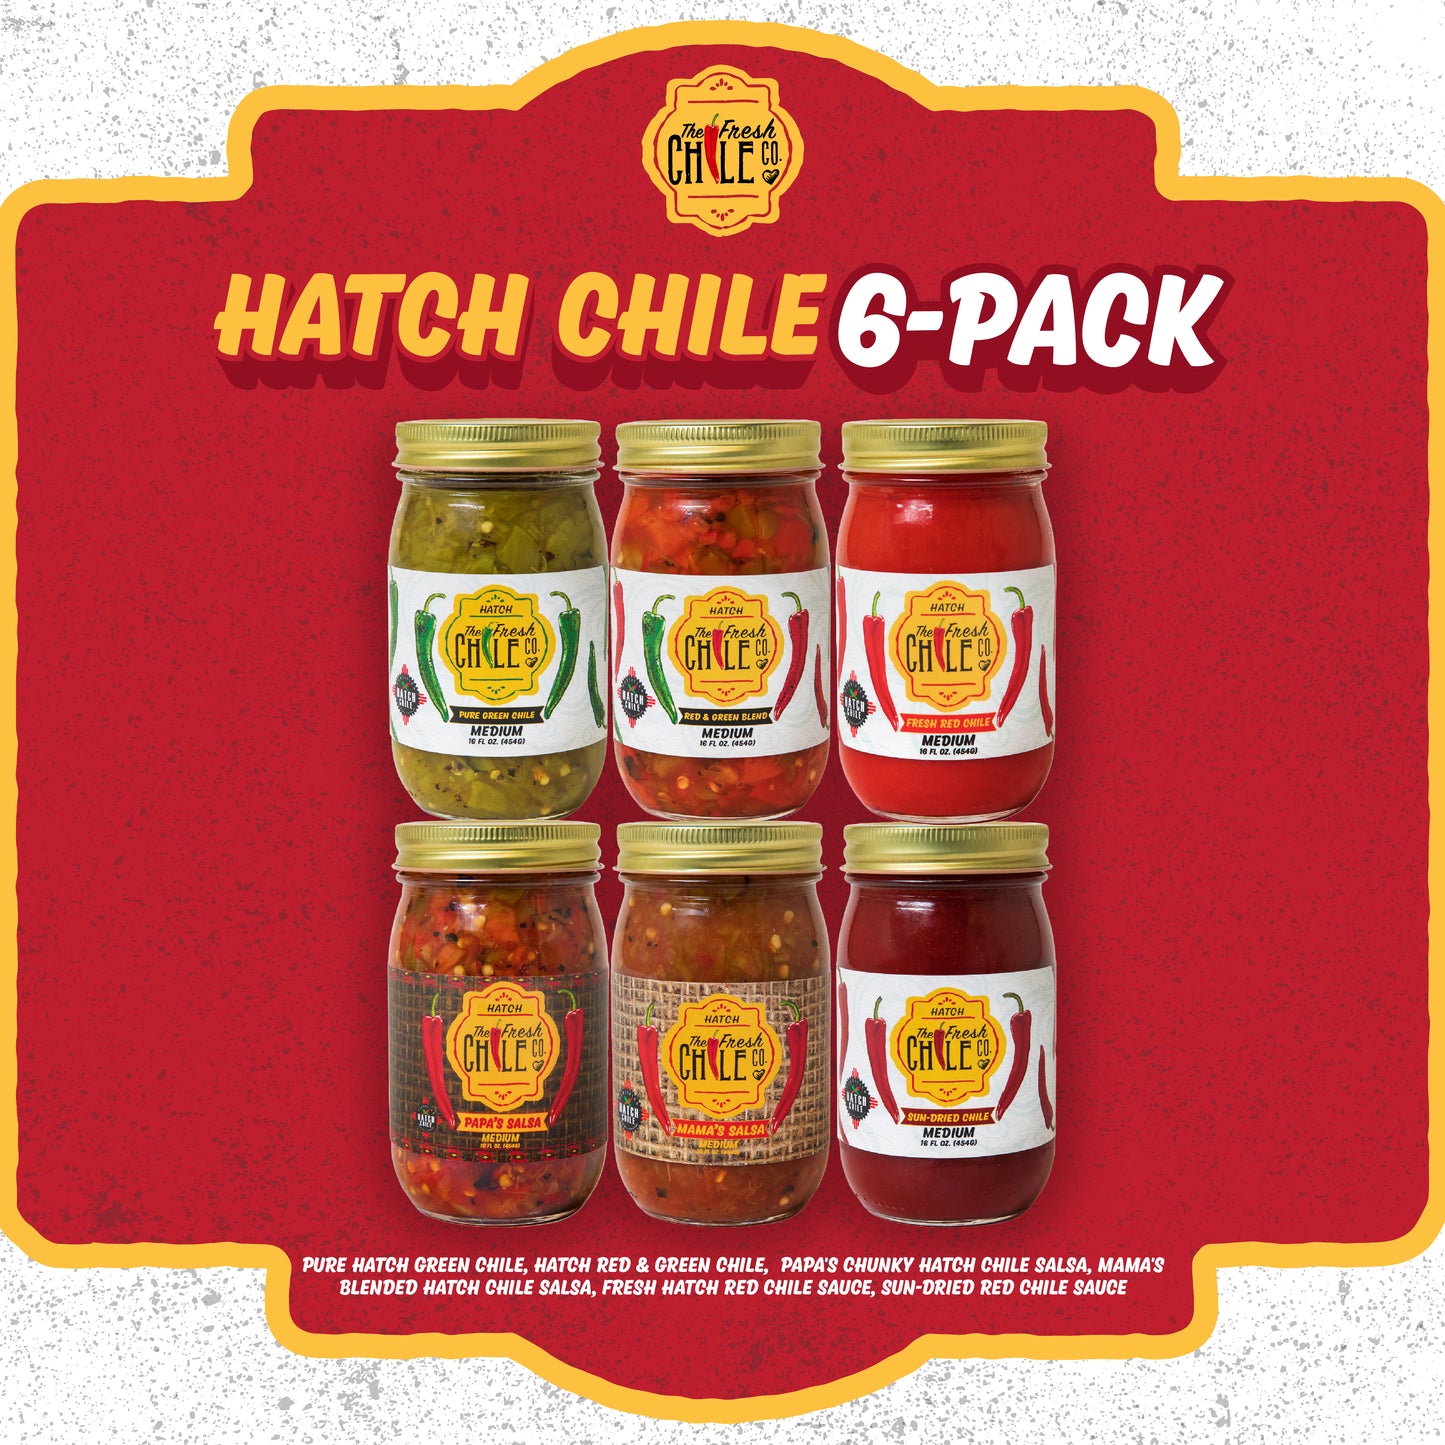 Hatch Chile 6-Pack